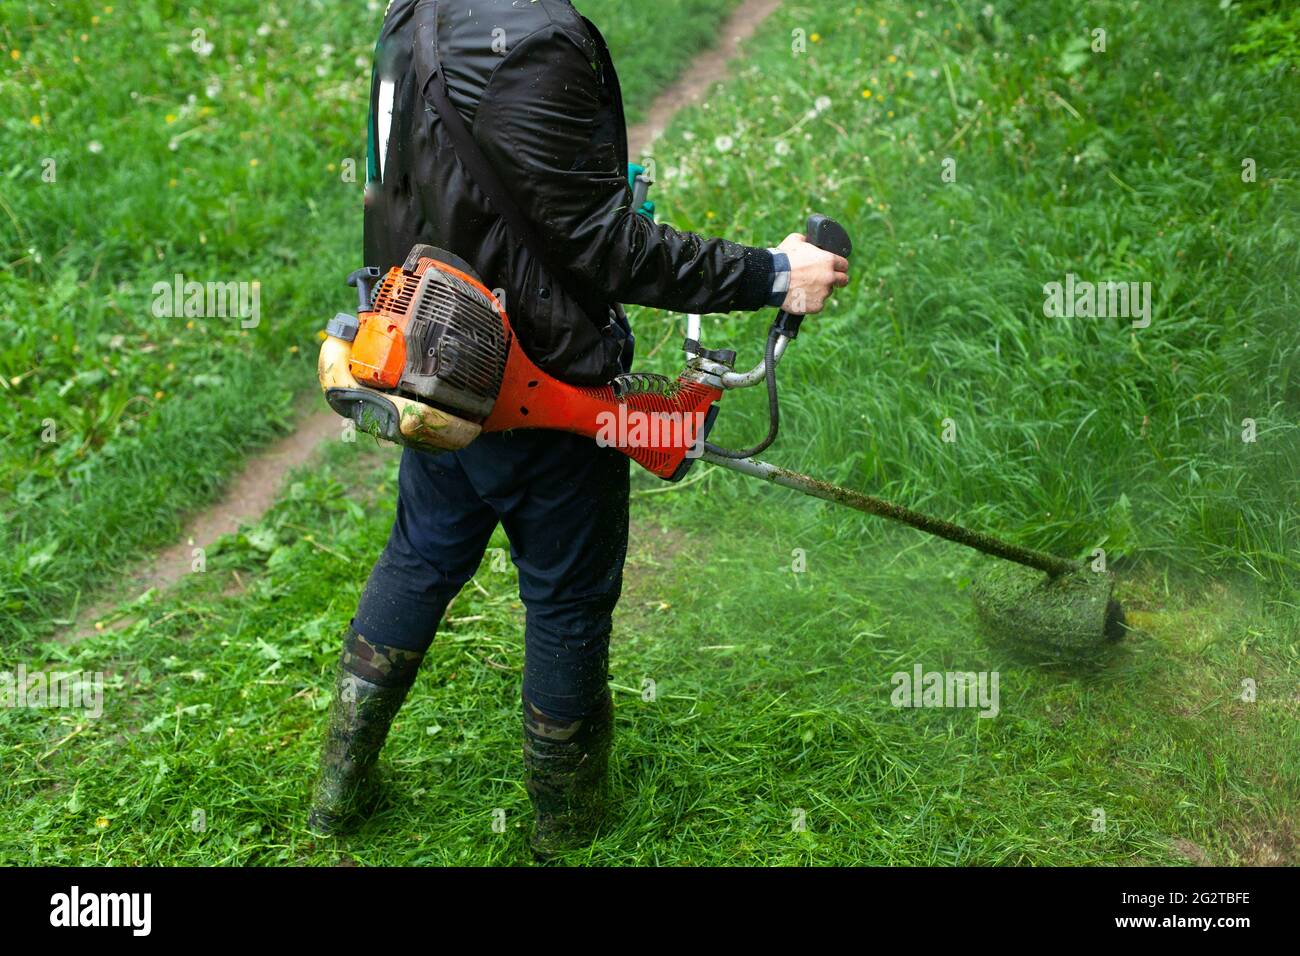 Mows the grass with a hand-held lawn mower. The gardener is cutting the lawn.  The gardener's tool cuts tall grass. The lawn mower in action Stock Photo -  Alamy